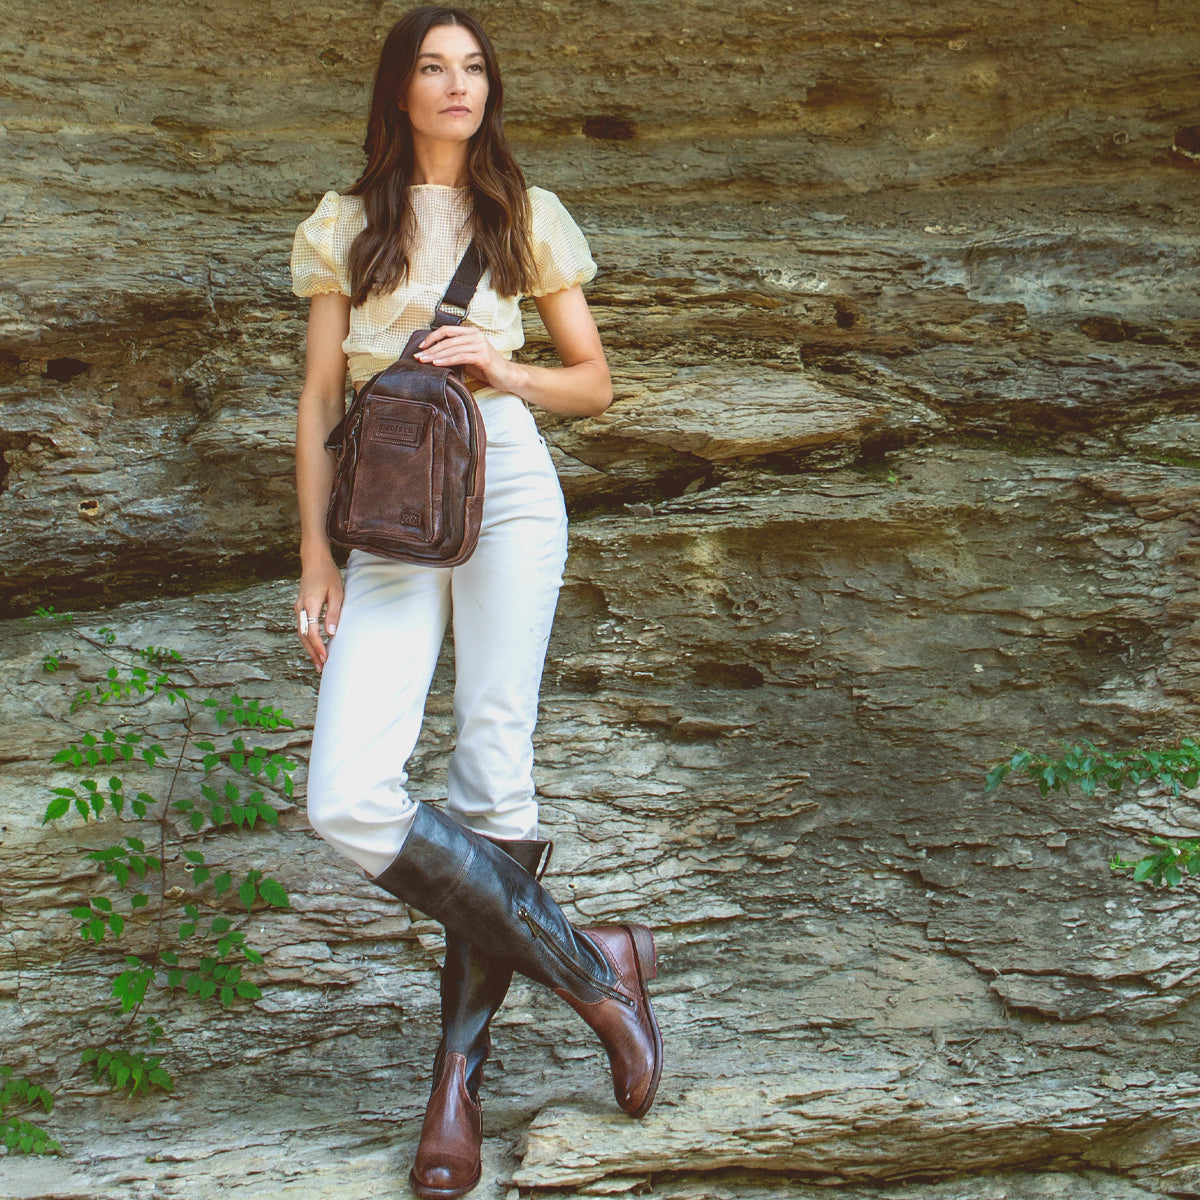 A woman is standing on a rock with a Beau sling backpack from Bed Stu, which features a durable strap holding the leather backpack.